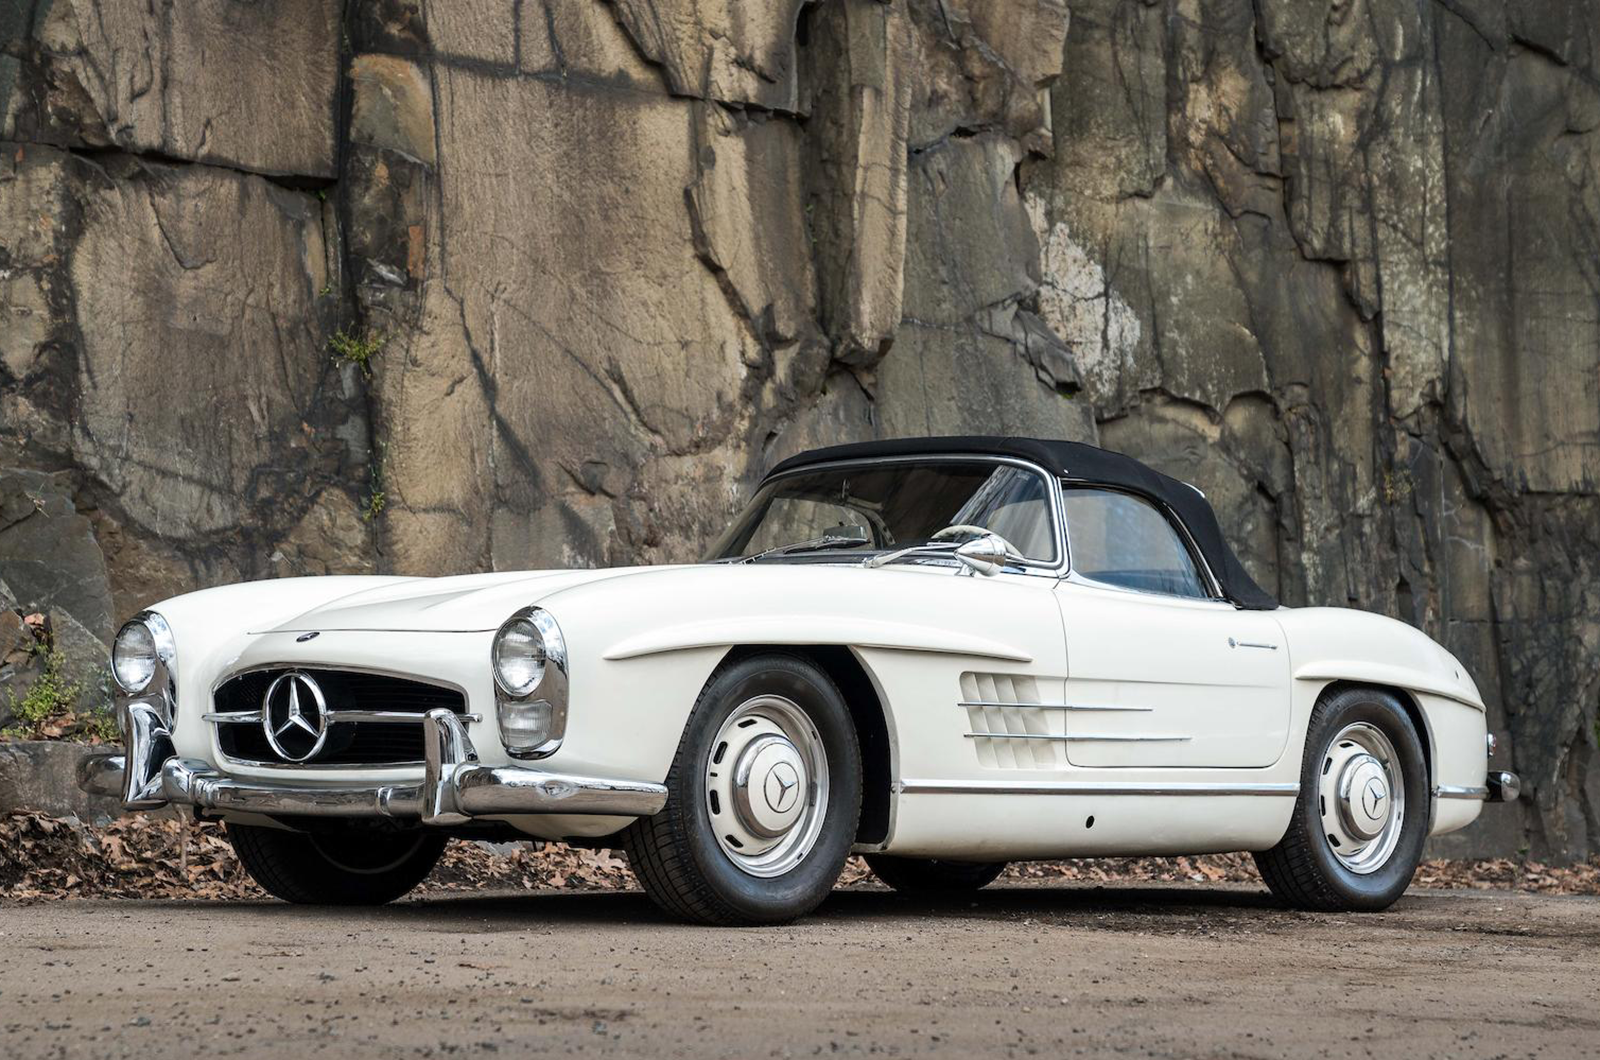 Shelby collection smashes estimates at Bonhams' Greenwich sale